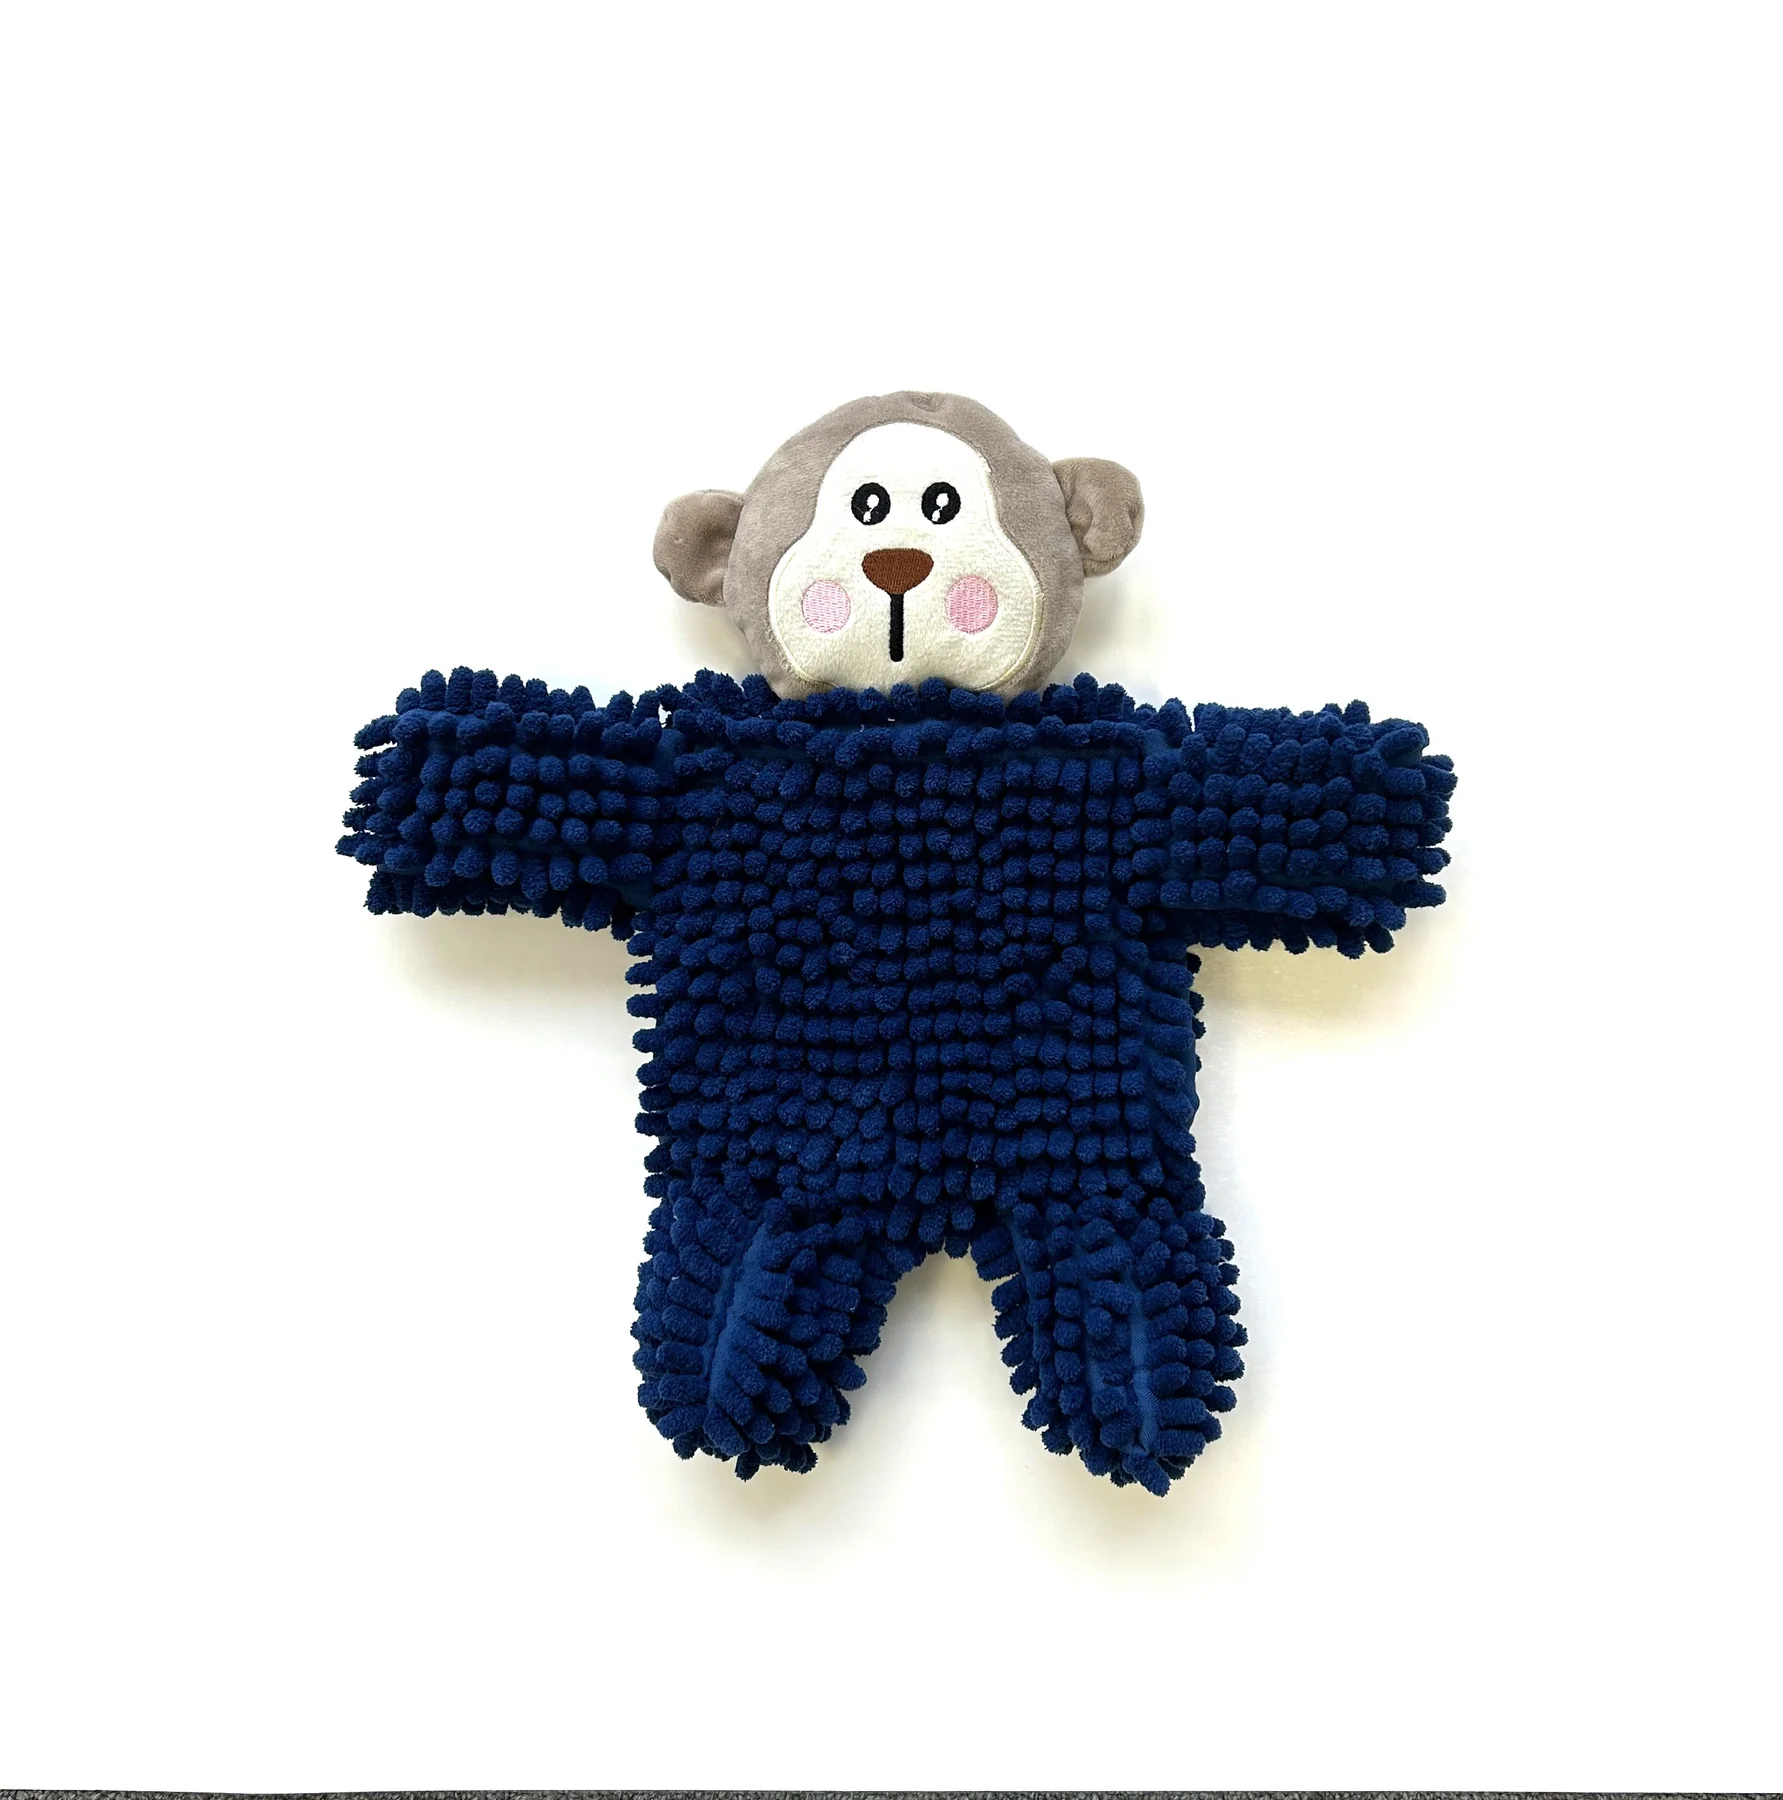 The Buddy Dog Toy in Navy Blue